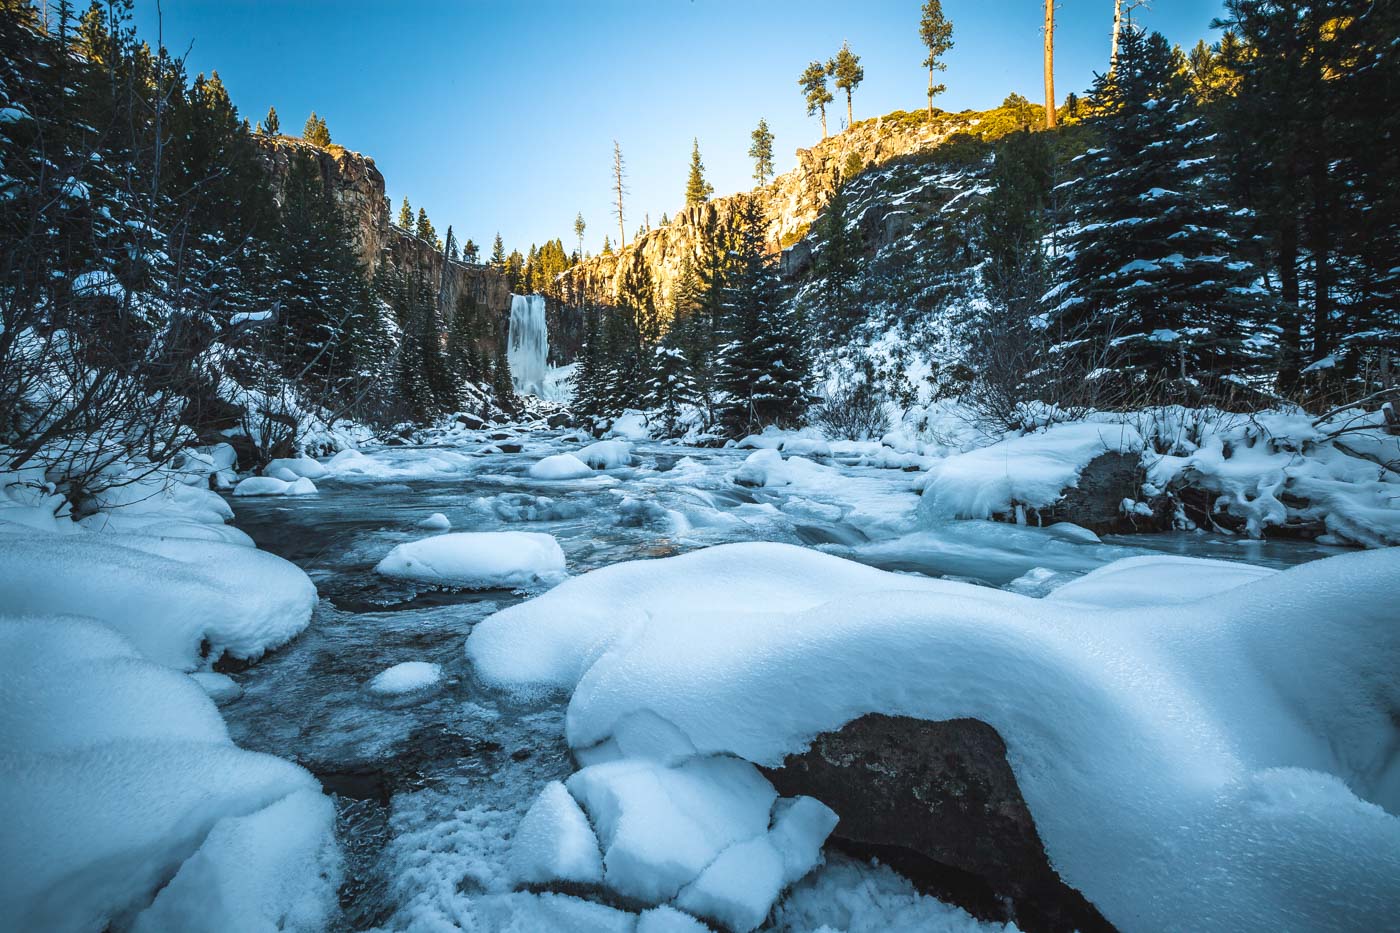 Tumalo Falls covered in ice and snow in Oregon.